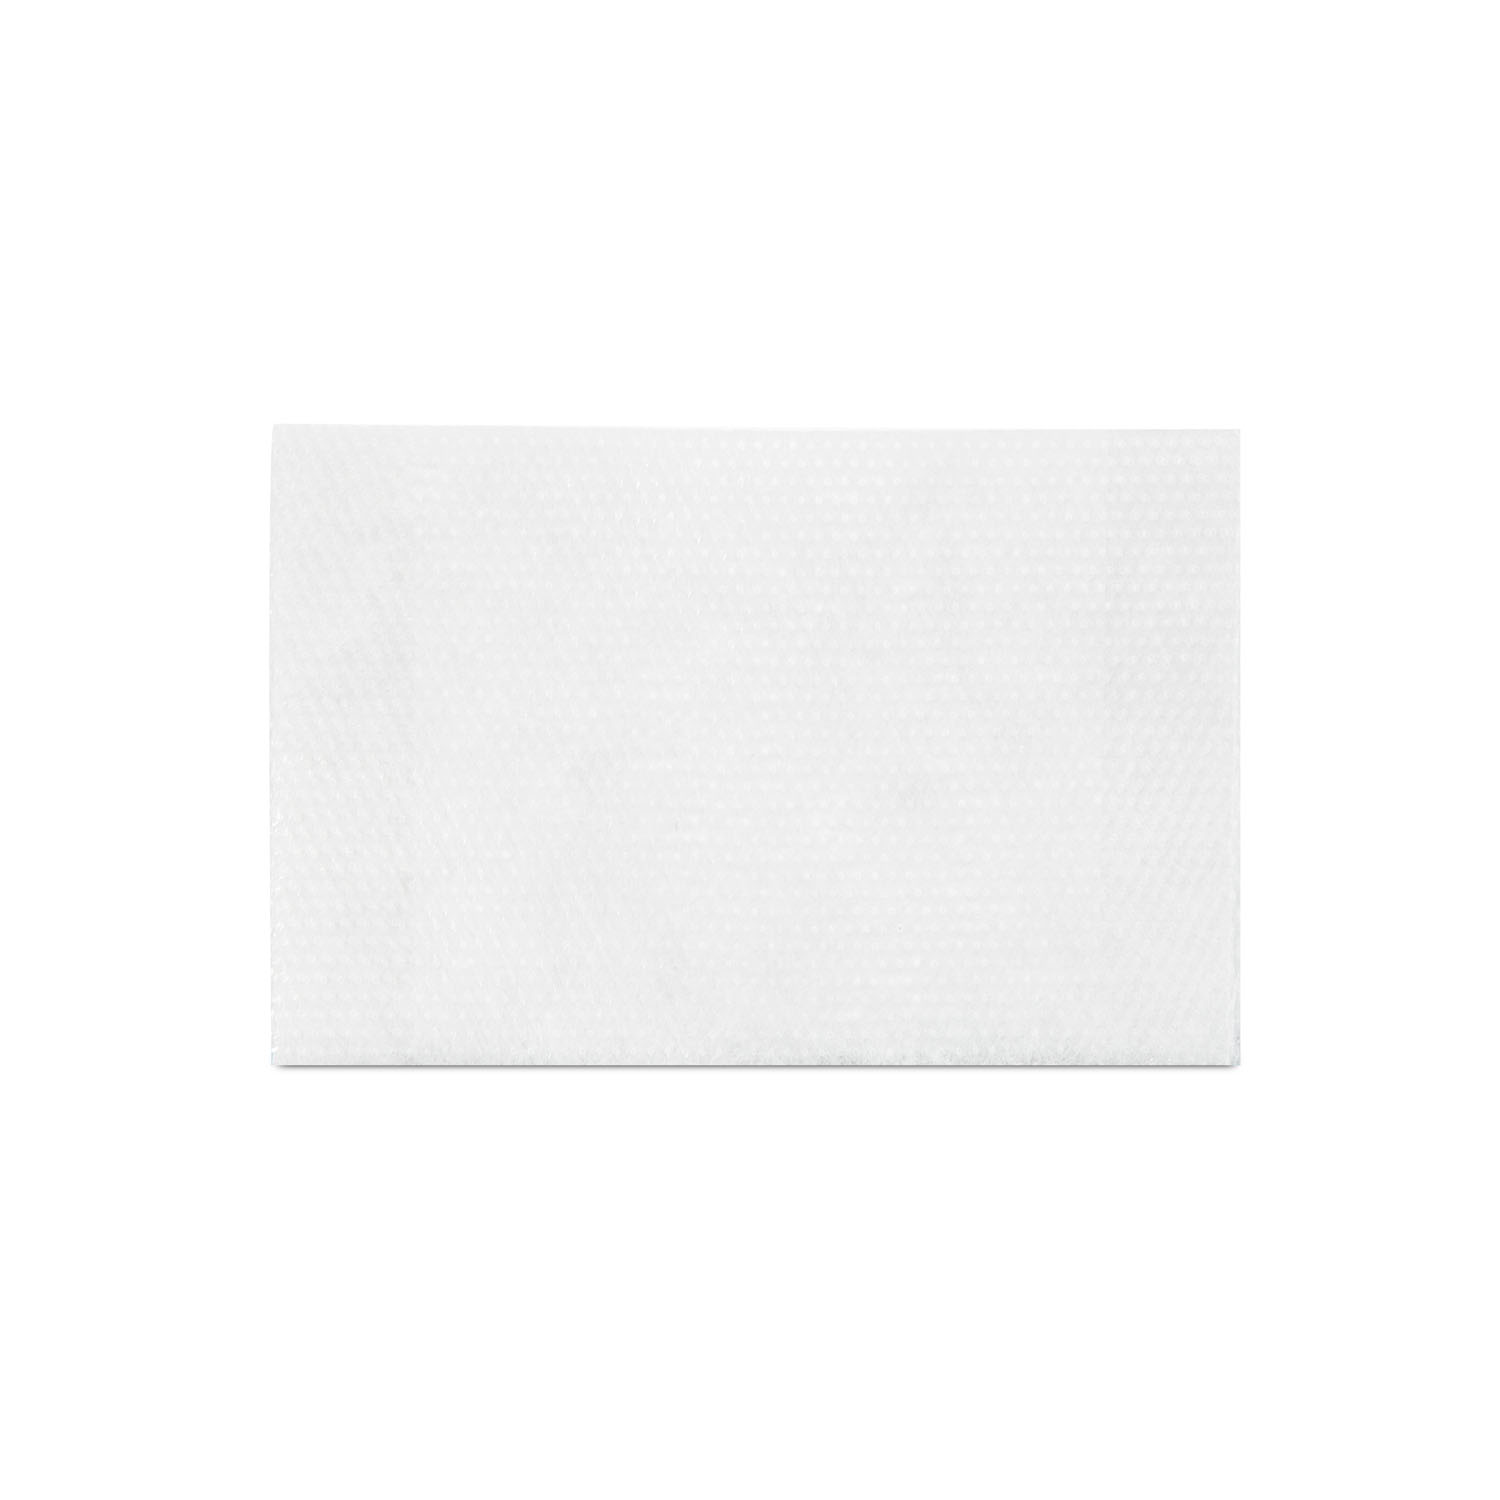 DUKAL NON-ADHERENT STERILE PADS : 7565033 CS $79.27 Stocked